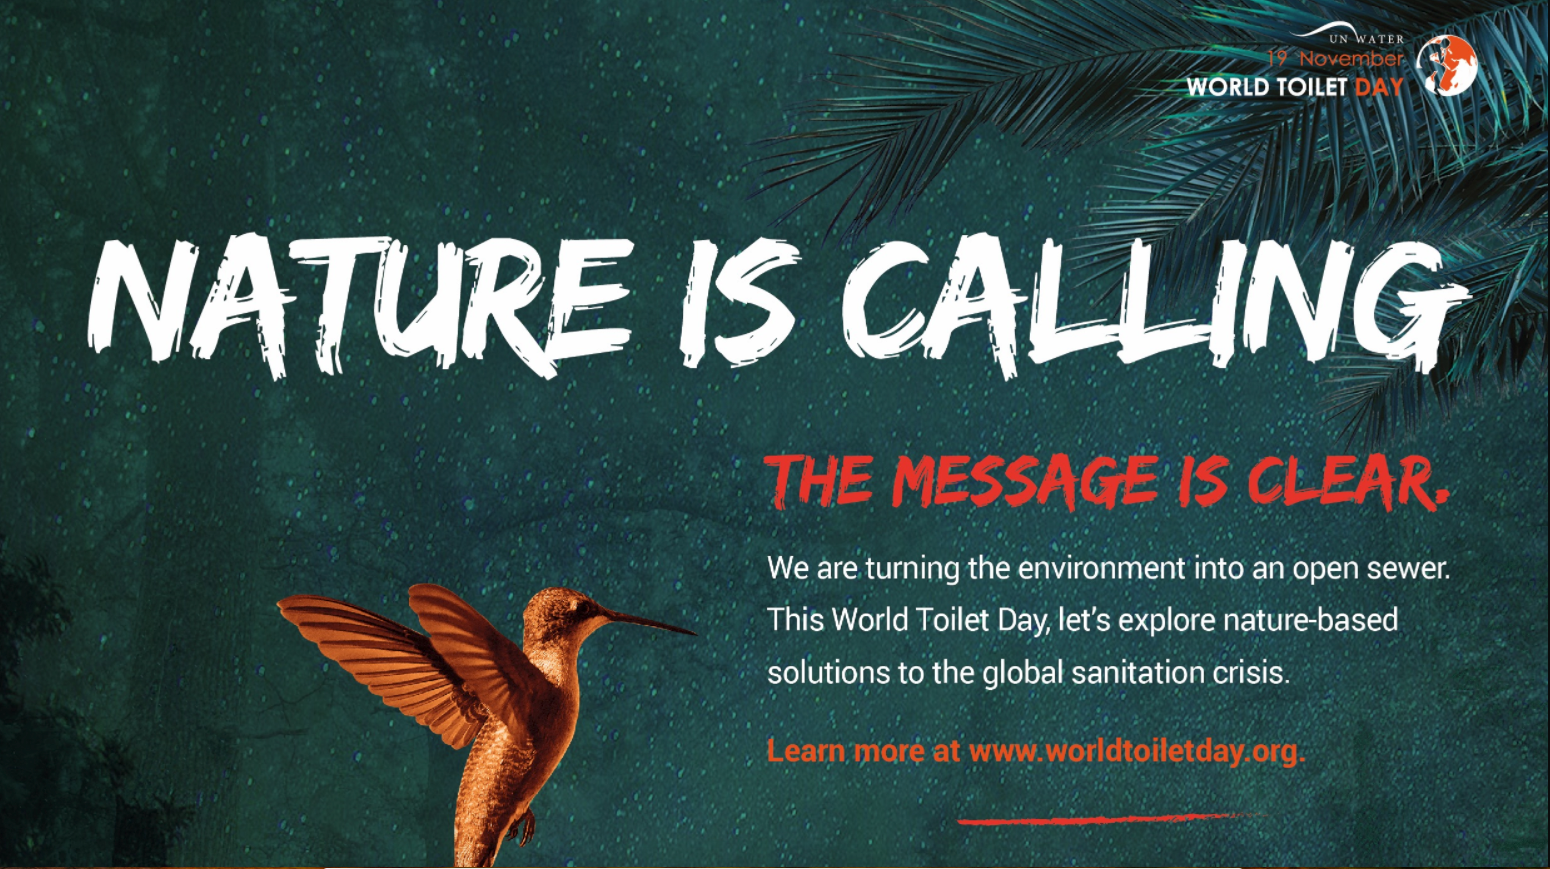 Nature is calling, the message is clear - world toilet day UN